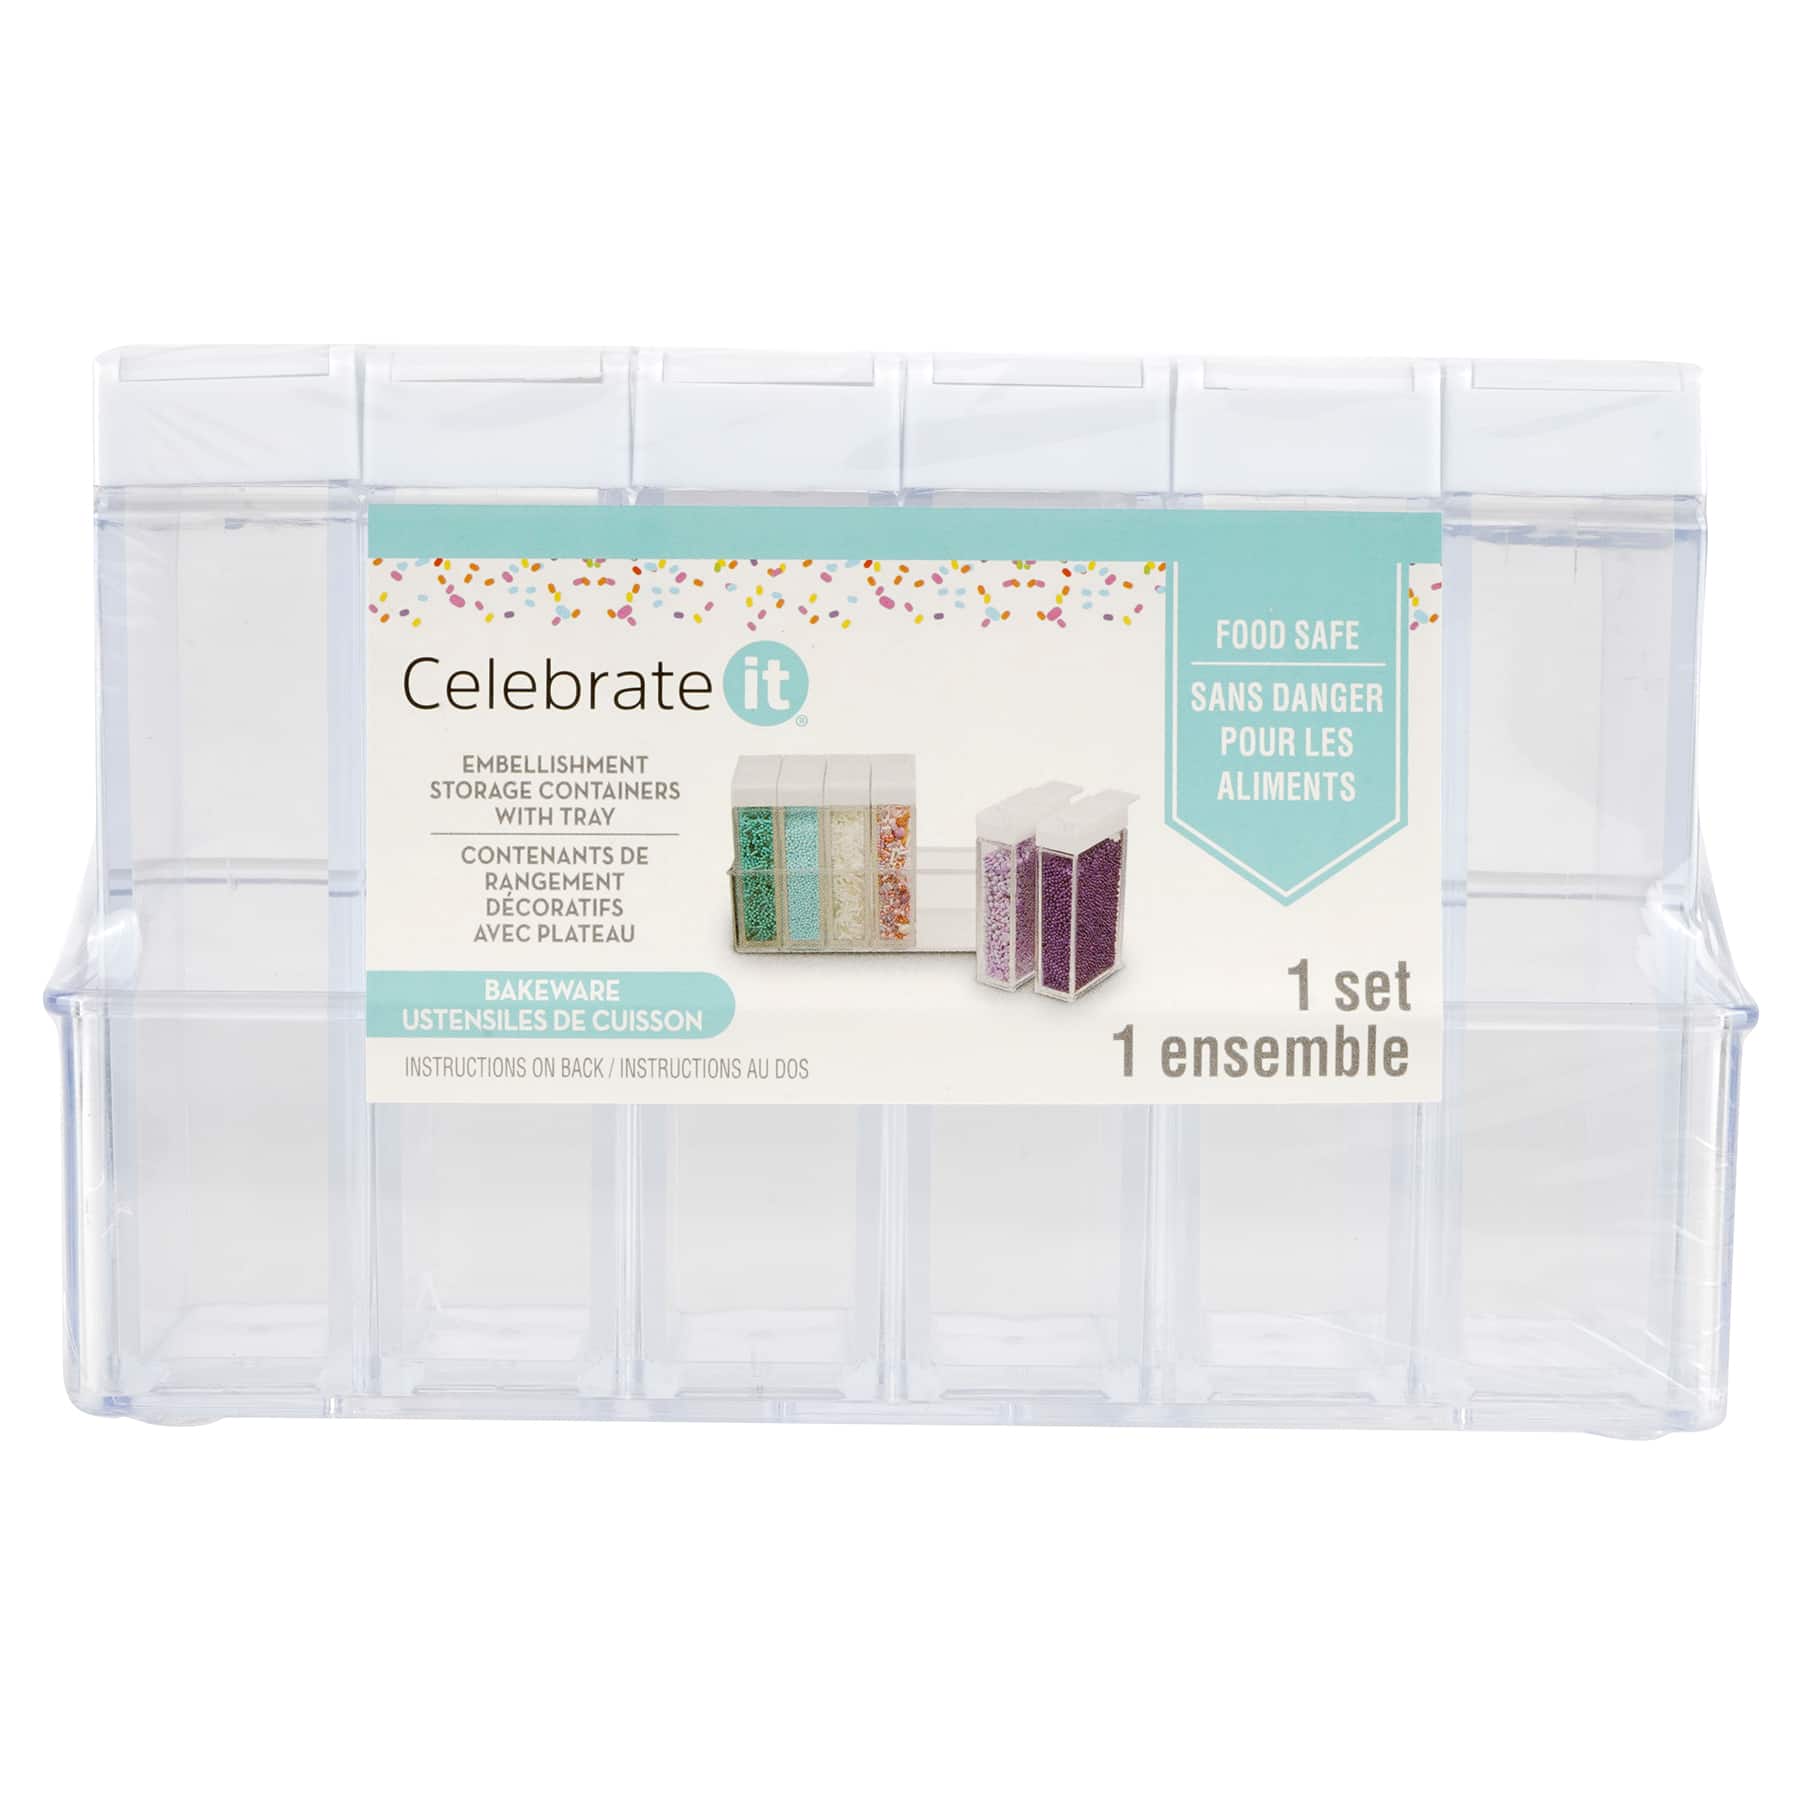 Celebrate It Embellishment Storage Containers With Tray - each